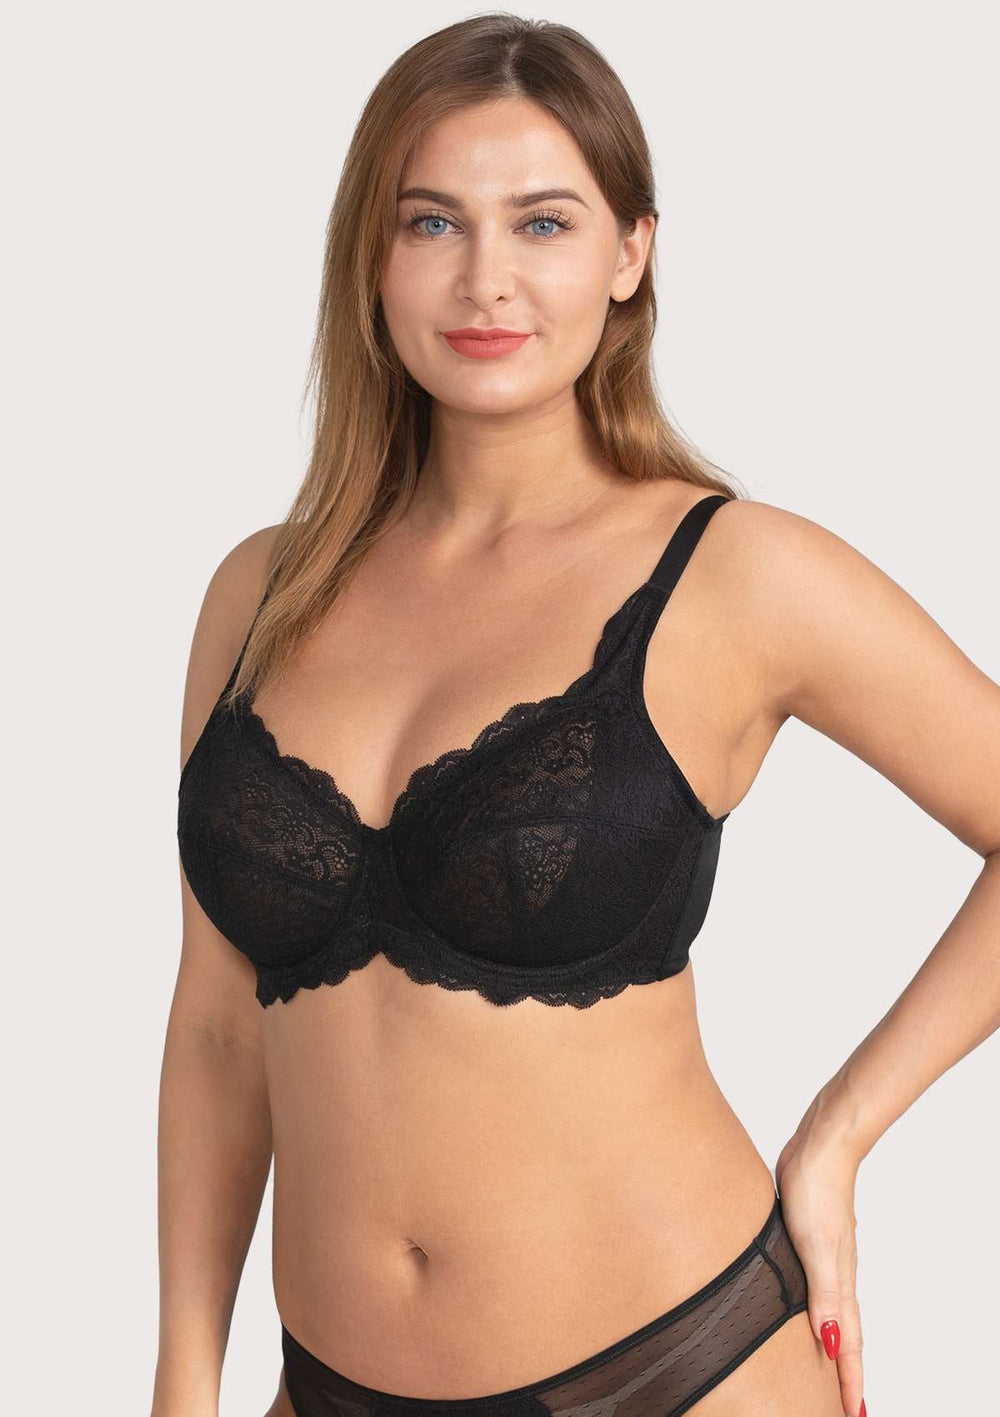  HOMRAA Women's Sexy Lace Bra Plus Size Floral